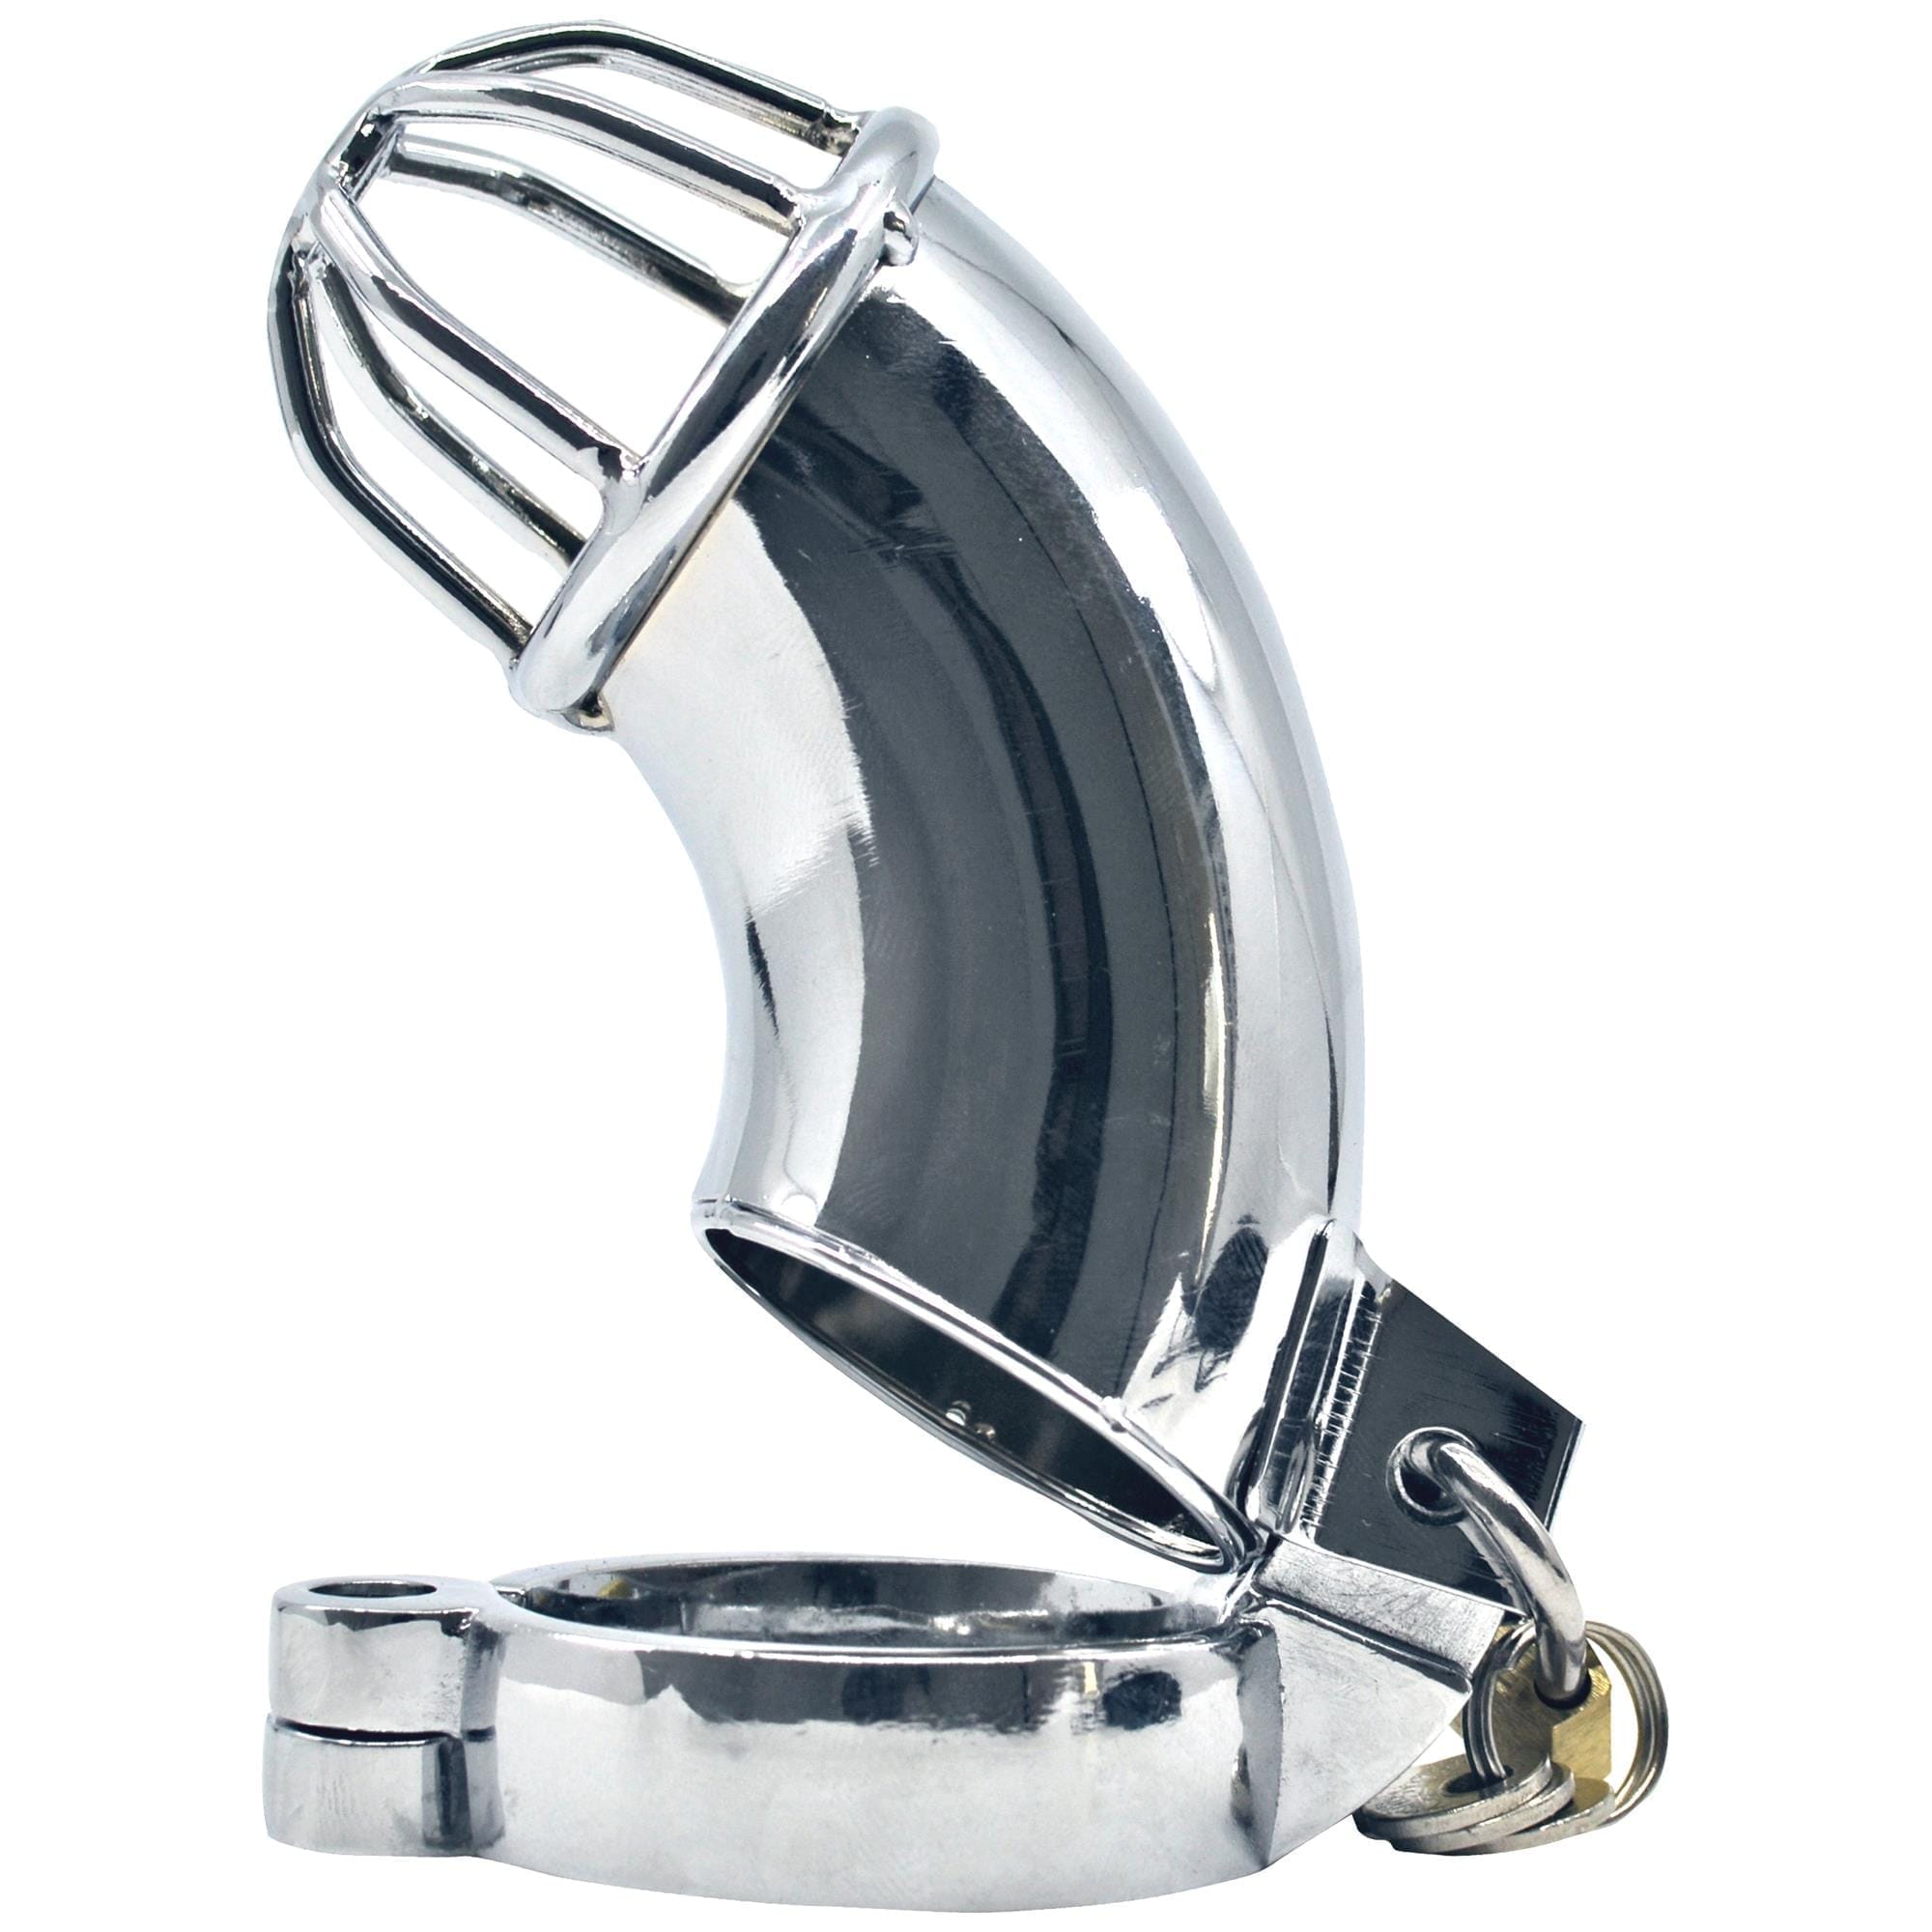 Buy Cock Cage Stainless Steel - Chastity Belt / Cock cage